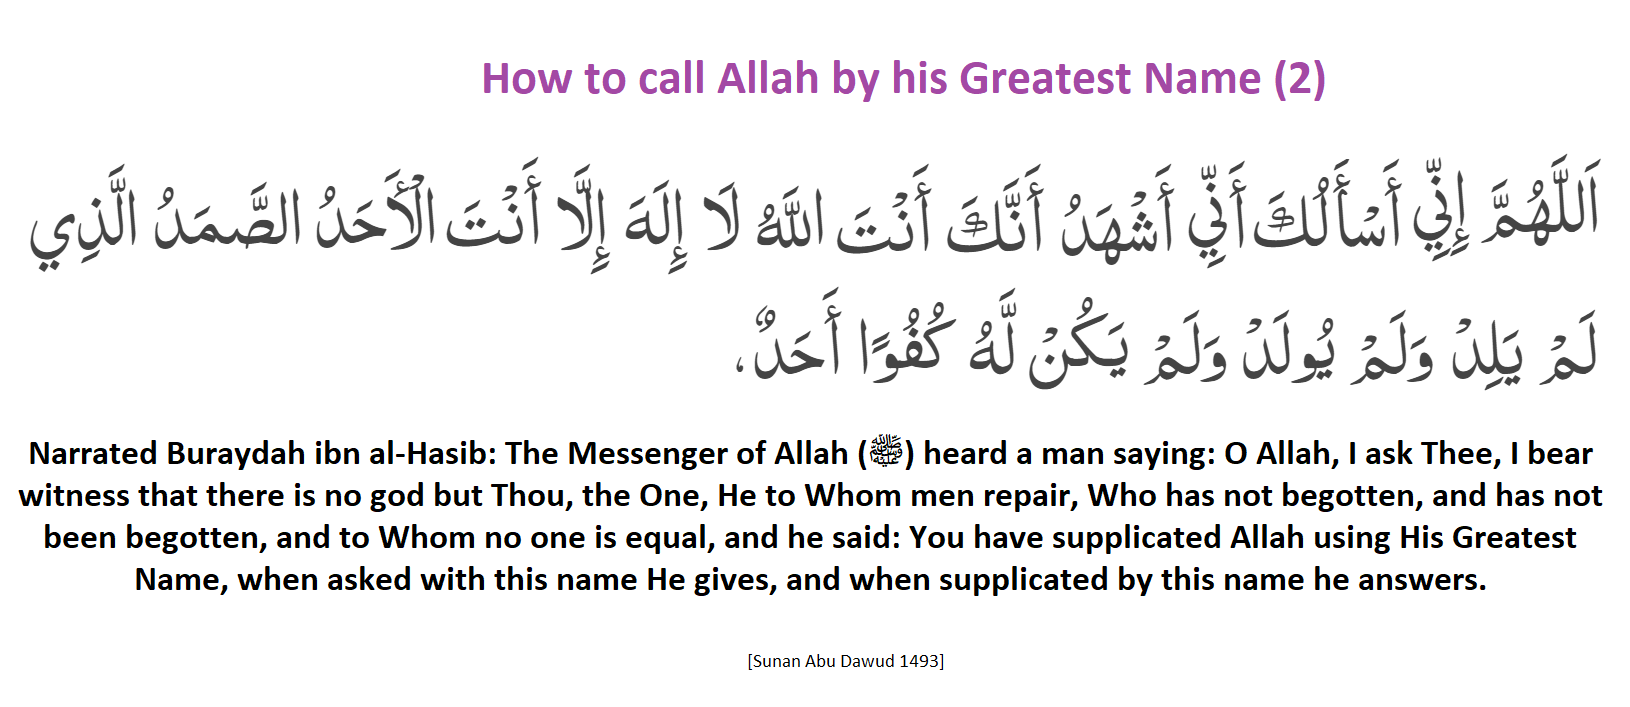 How to call Allah by his Greatest Name 2